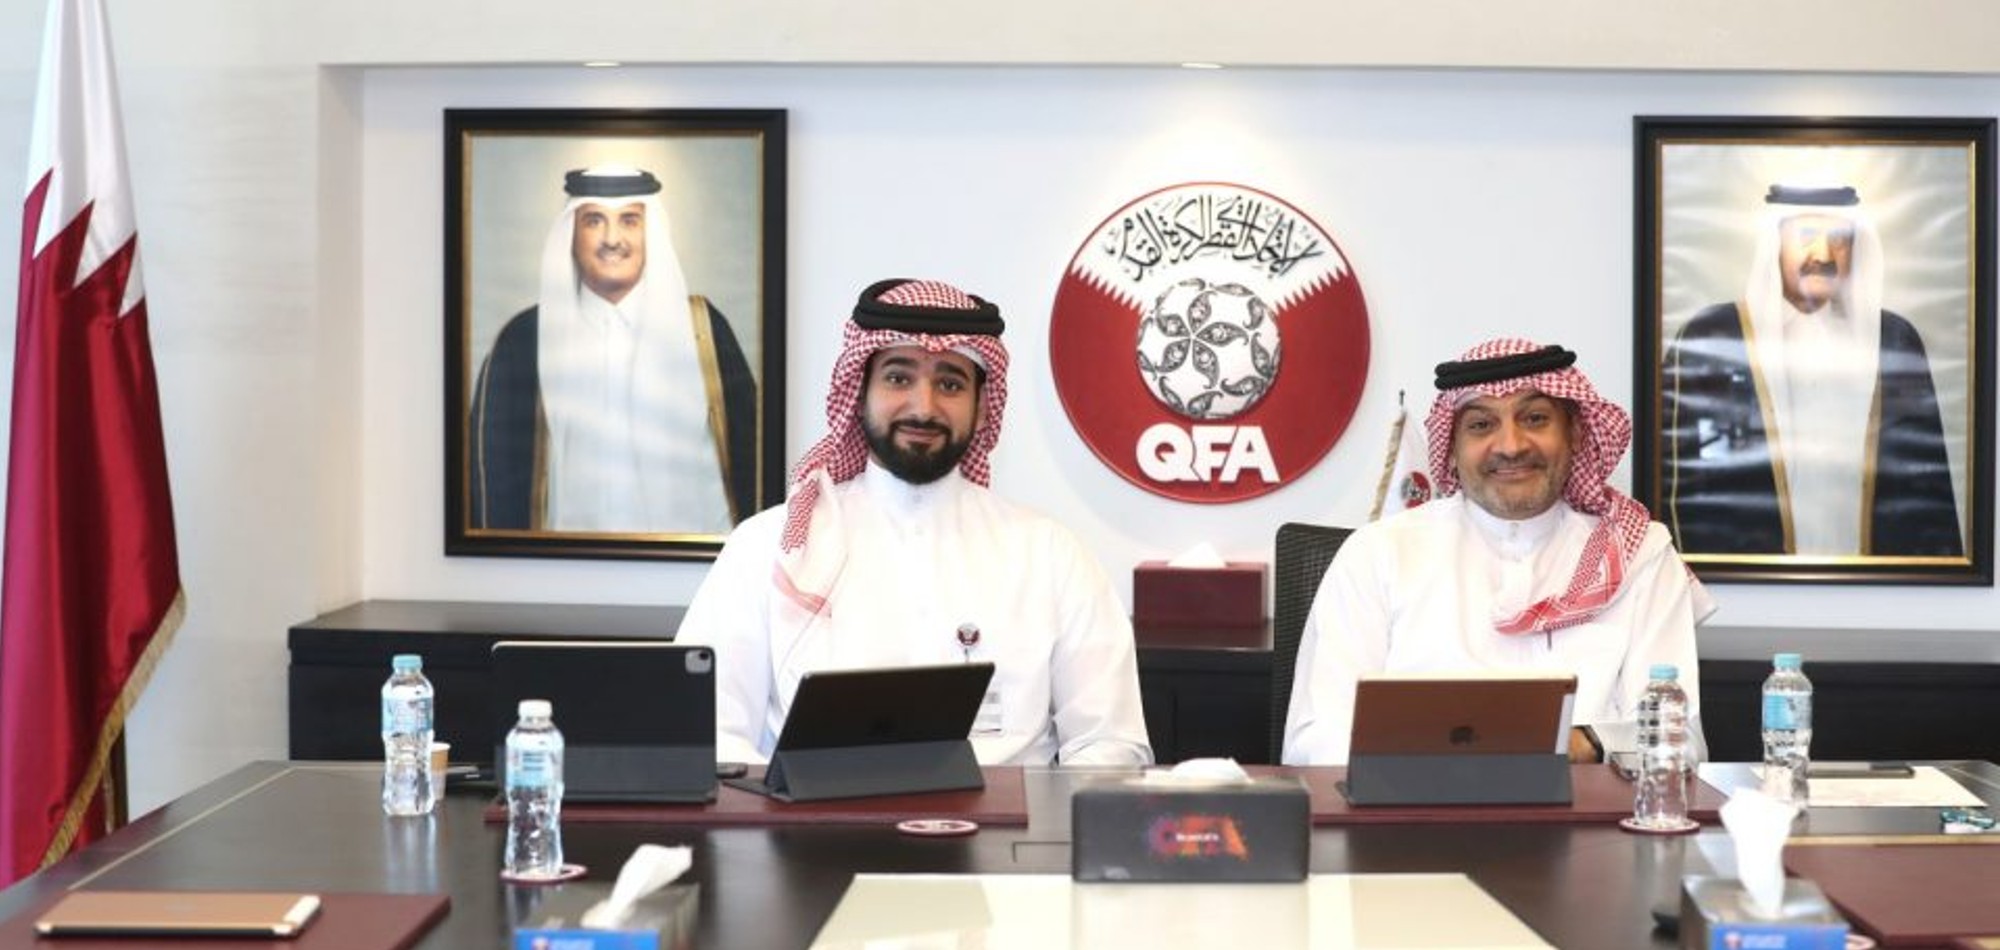 QFA Officials Take Part in 31st AFC Congress